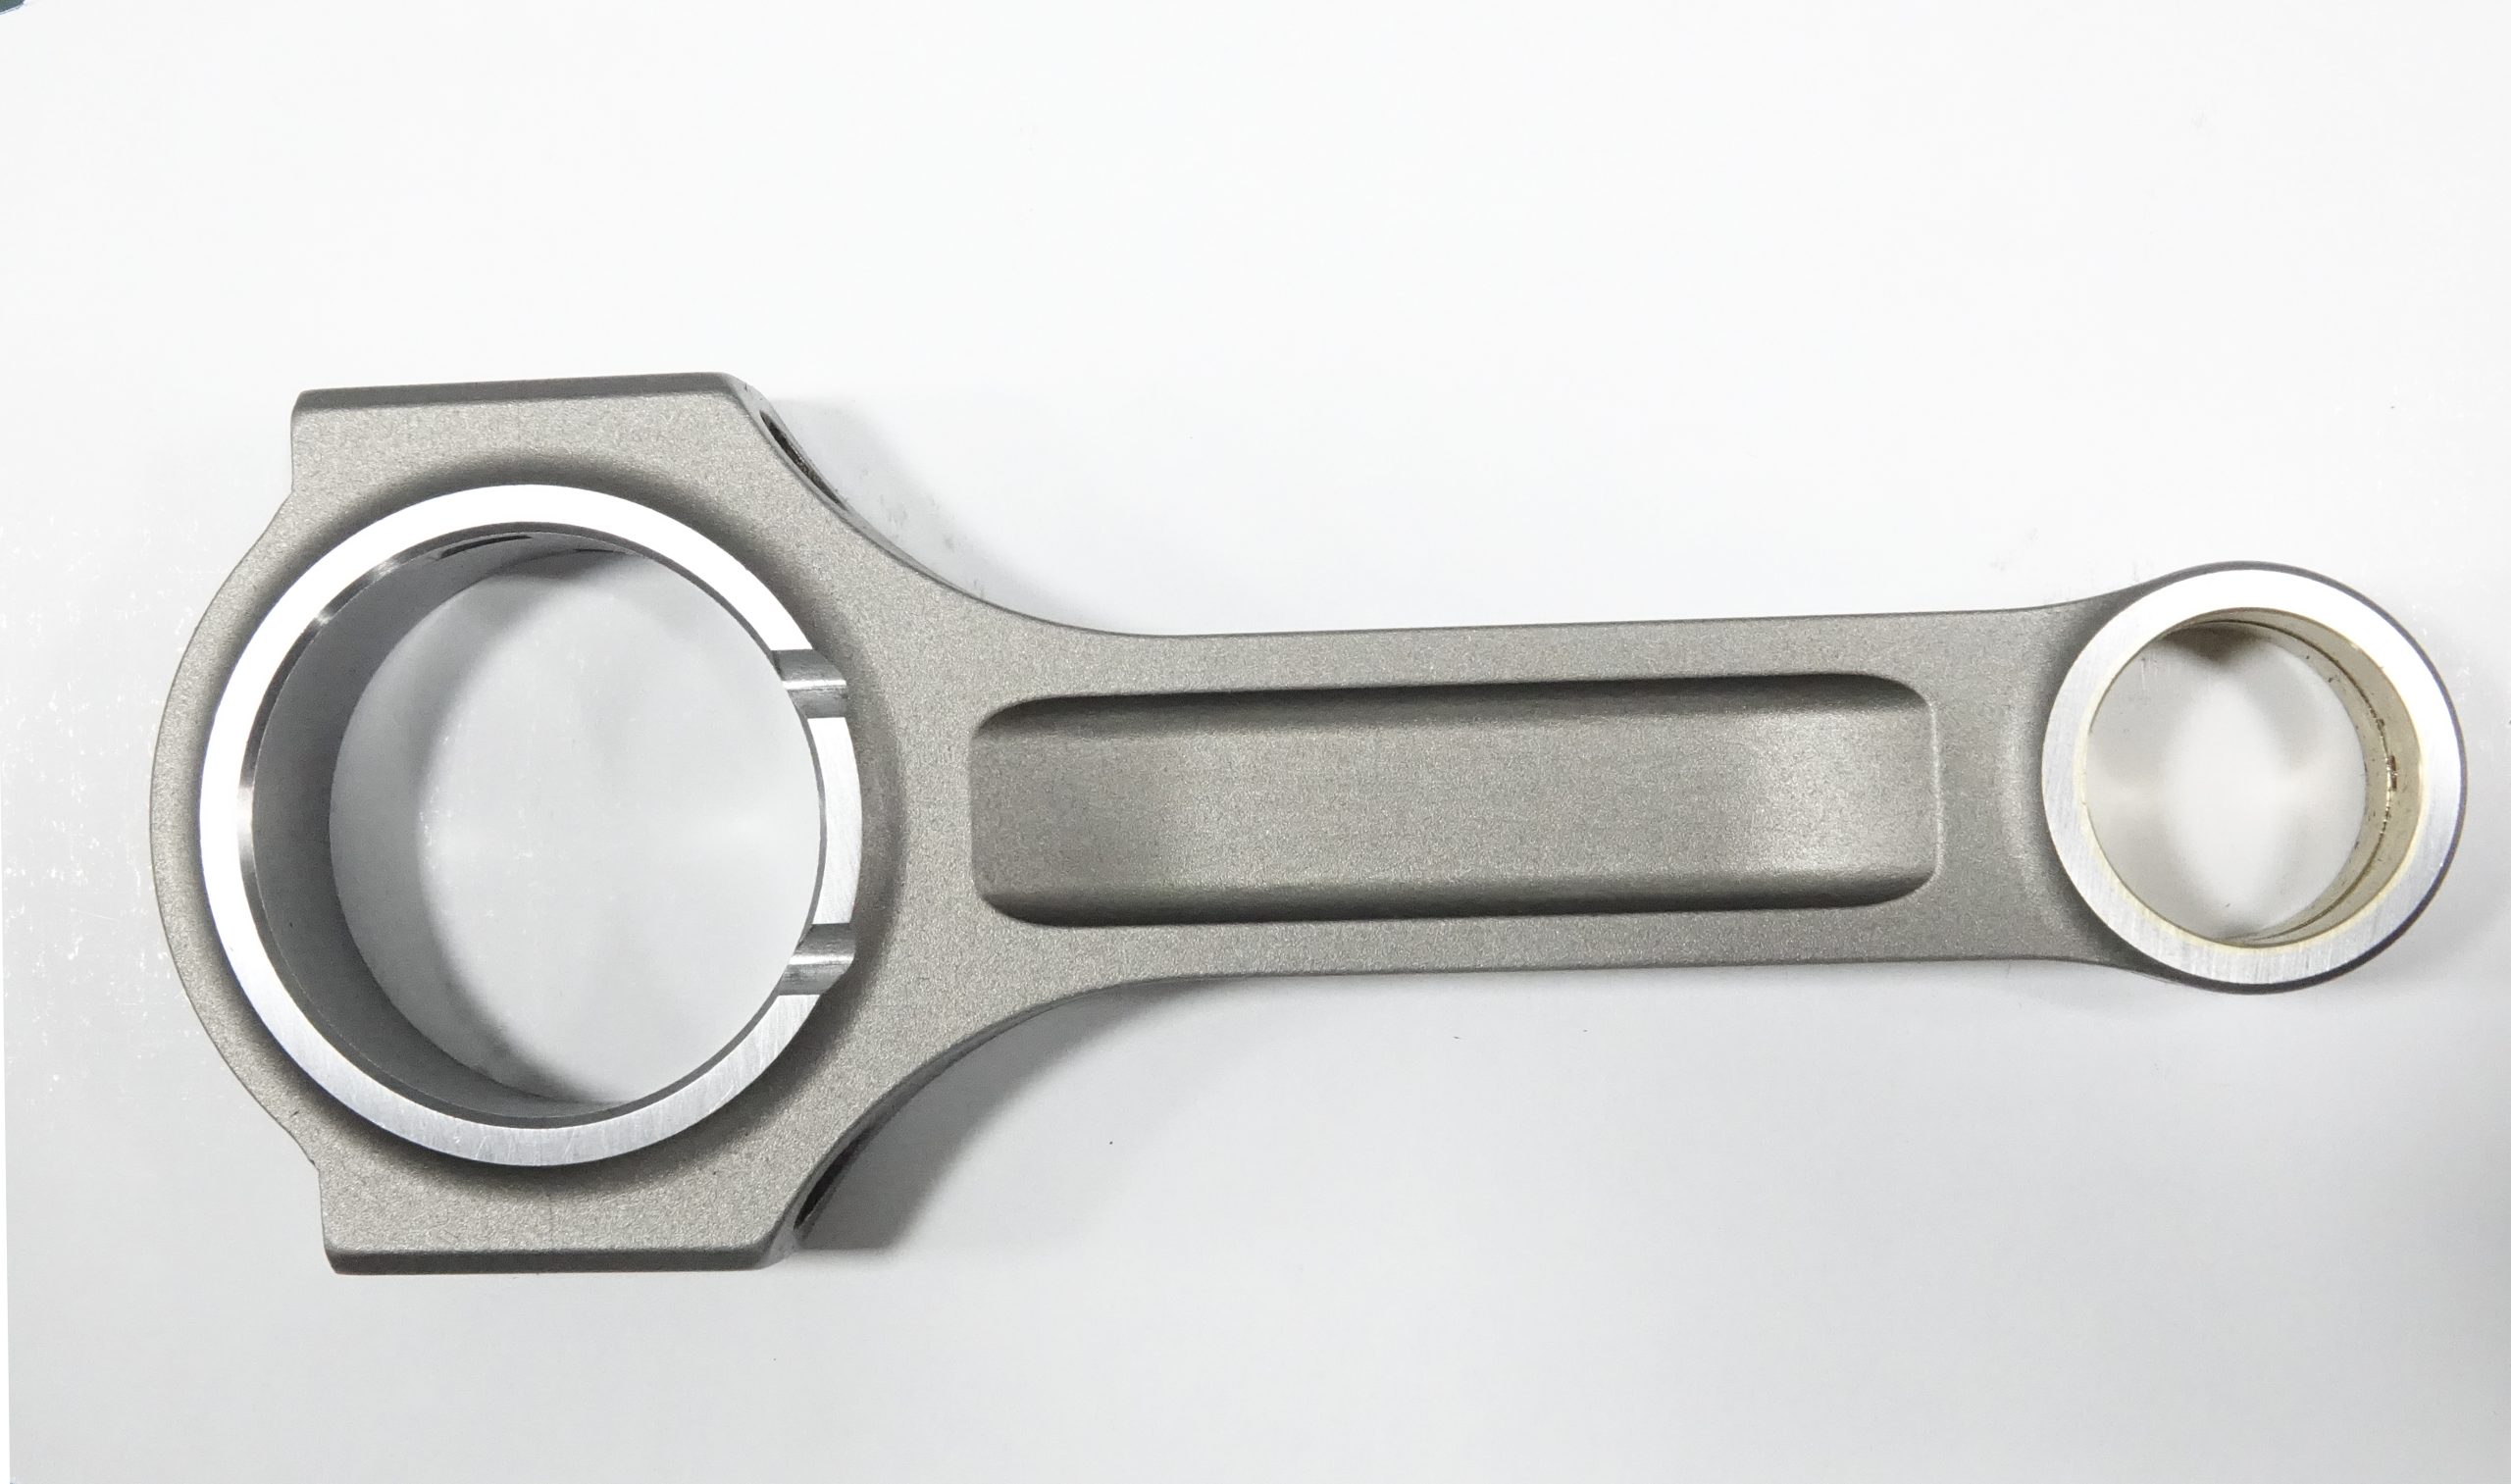 Connecting Rod for Audi 2.5L TFSI (TT-RS) - 21.0mm